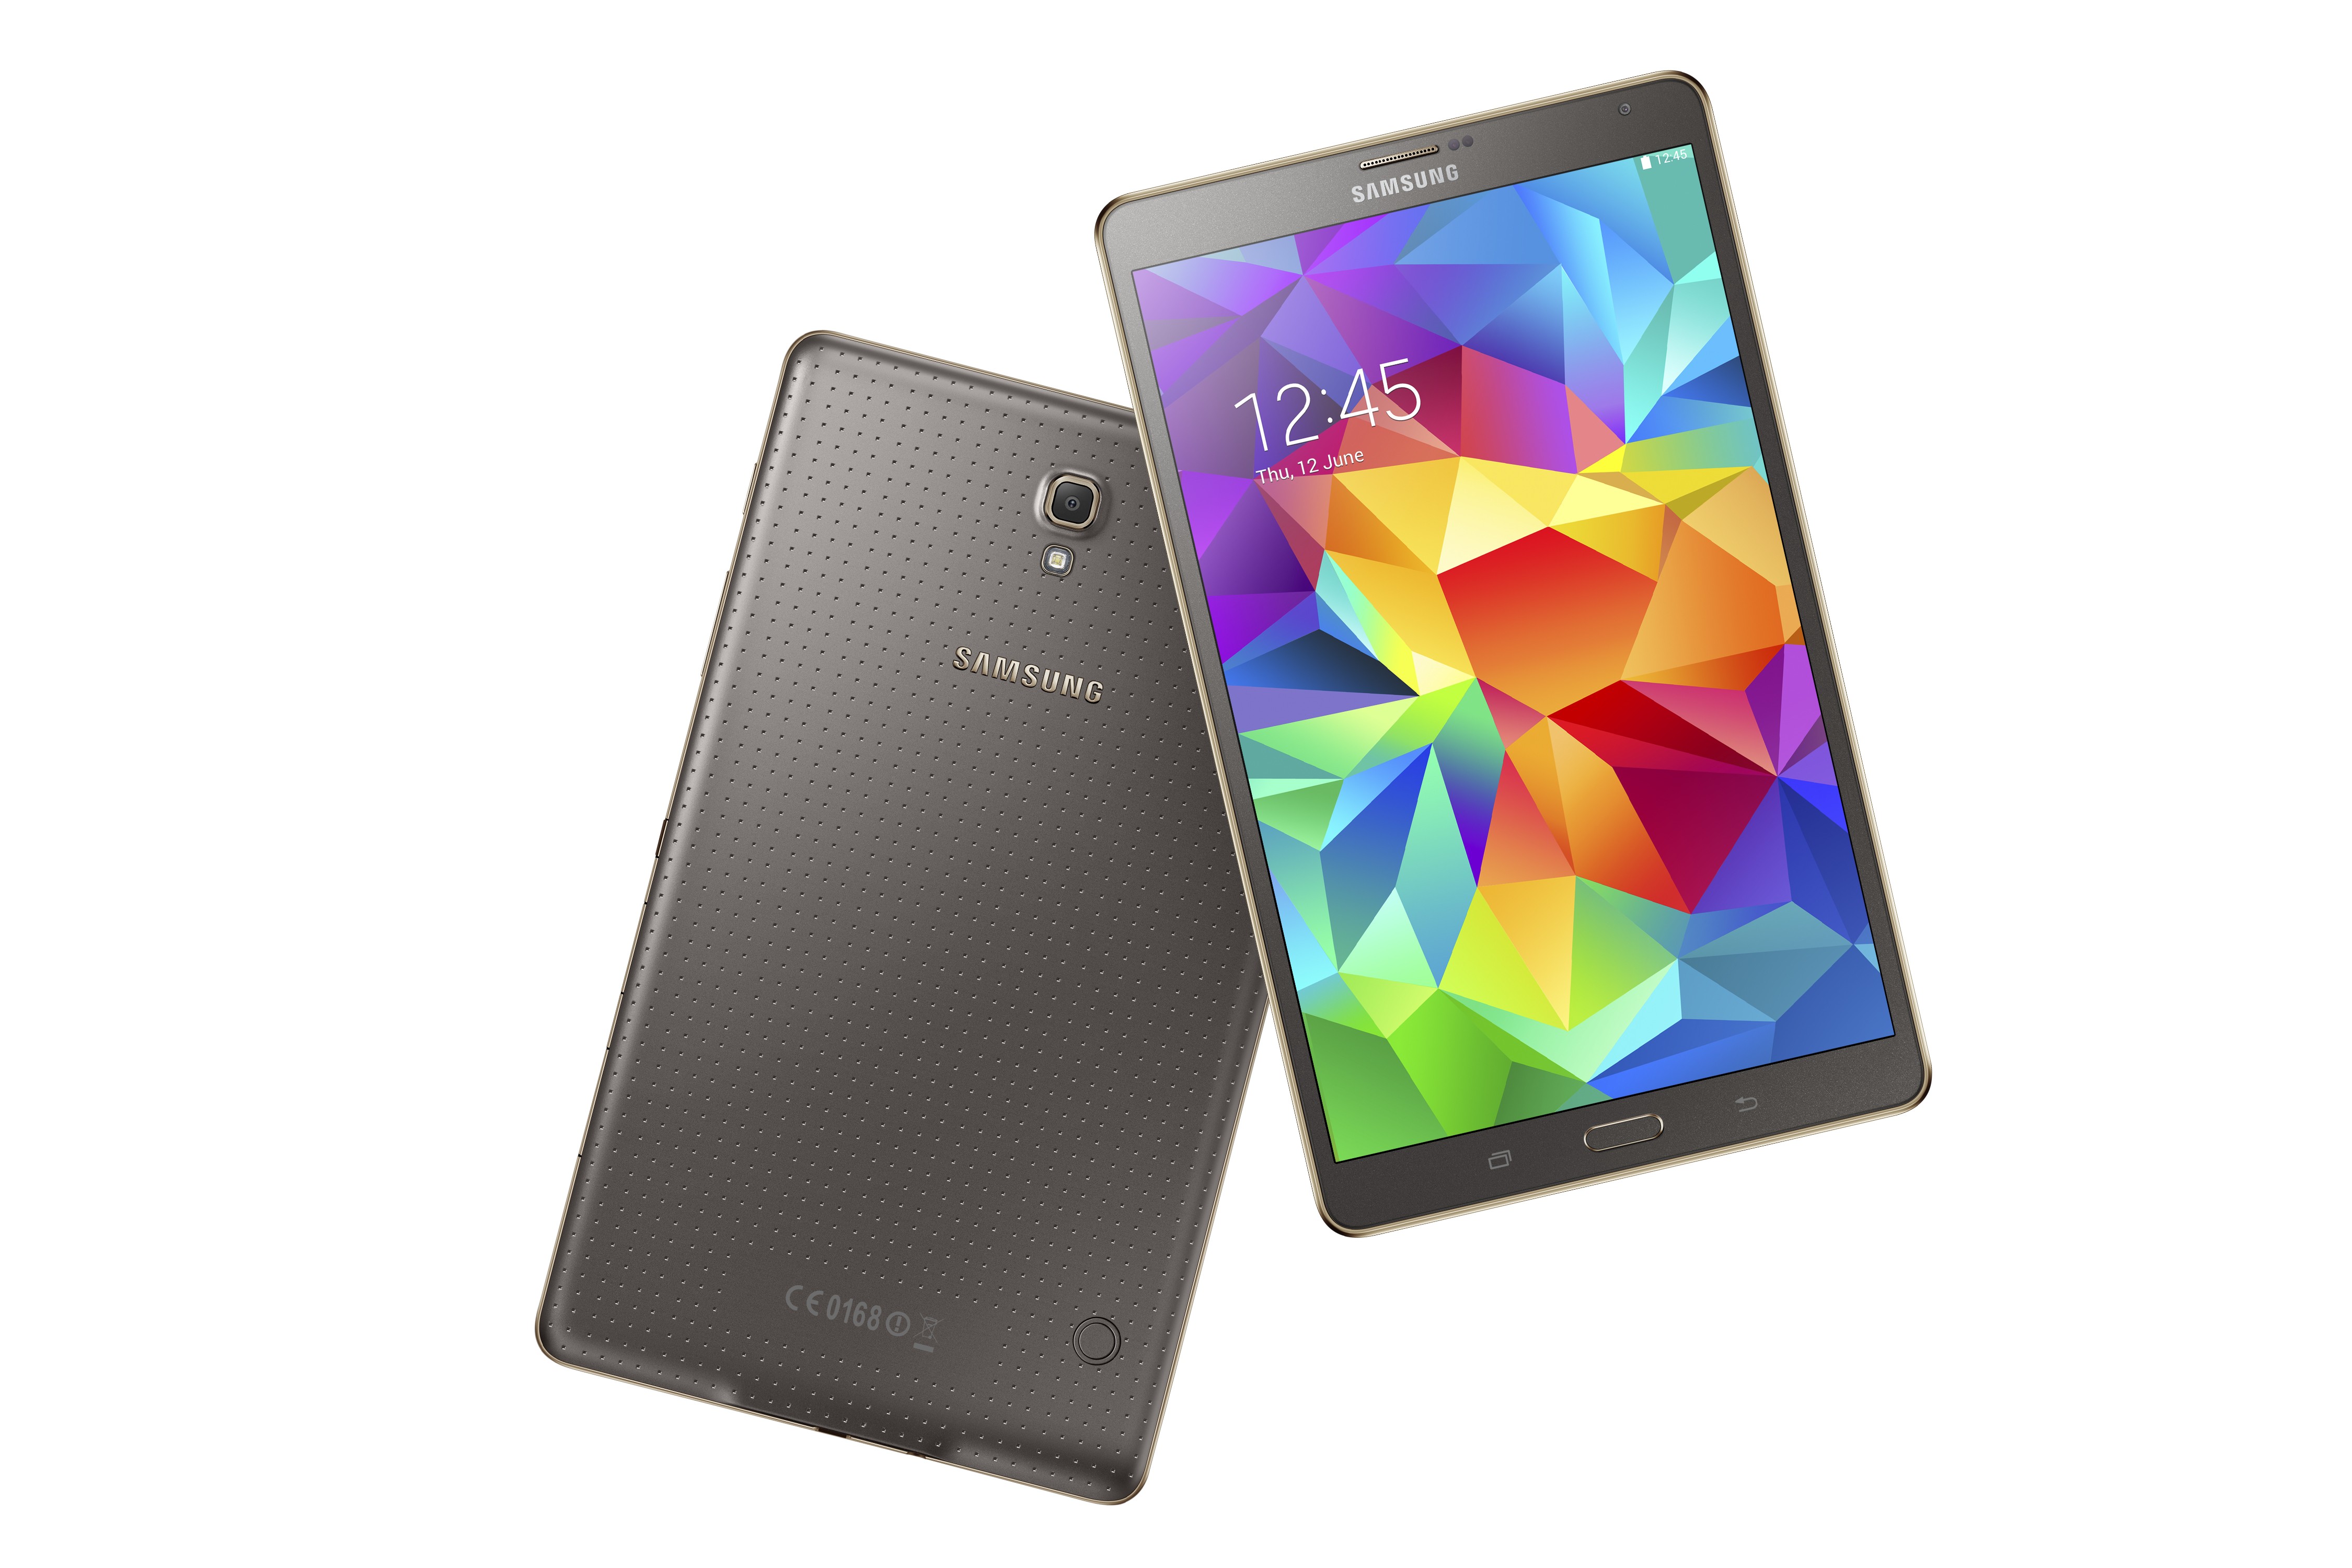 Samsung Galaxy Tab S2 Could Debut at MWC 2015 to Compete with iPad Air 2